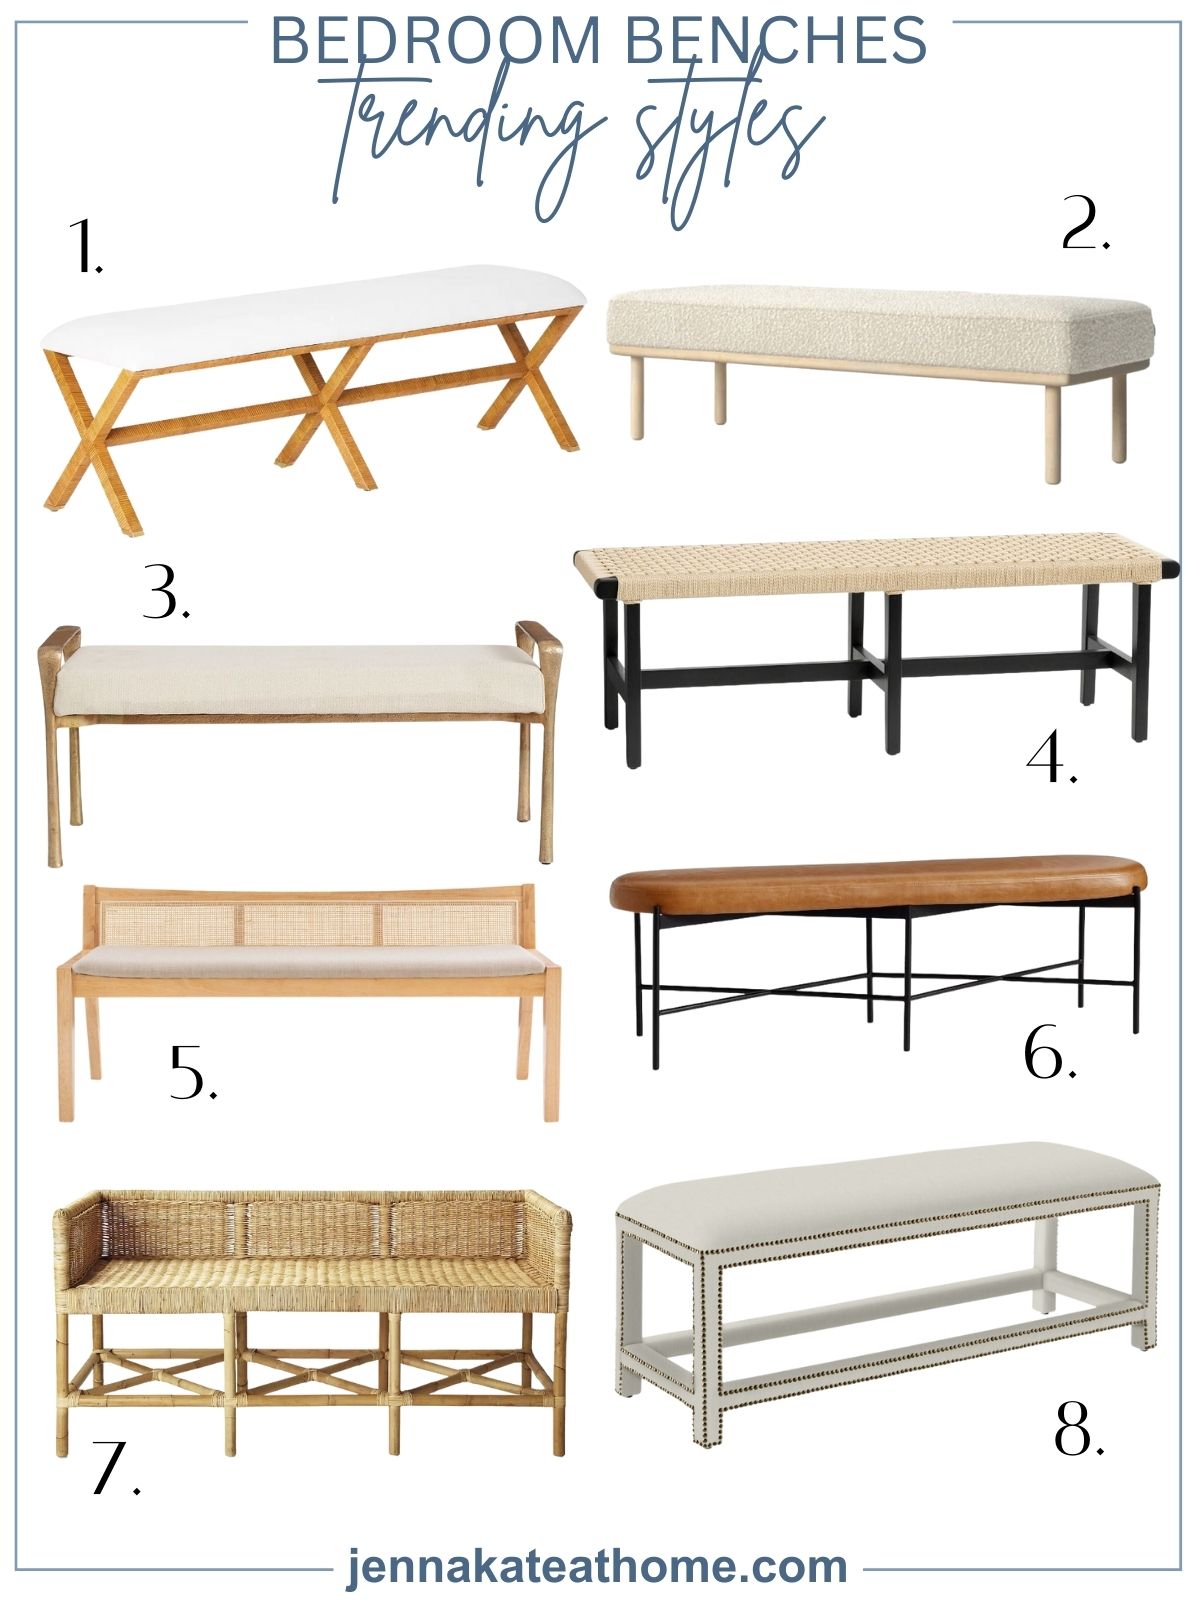 a collage of my favorite bedroom benches